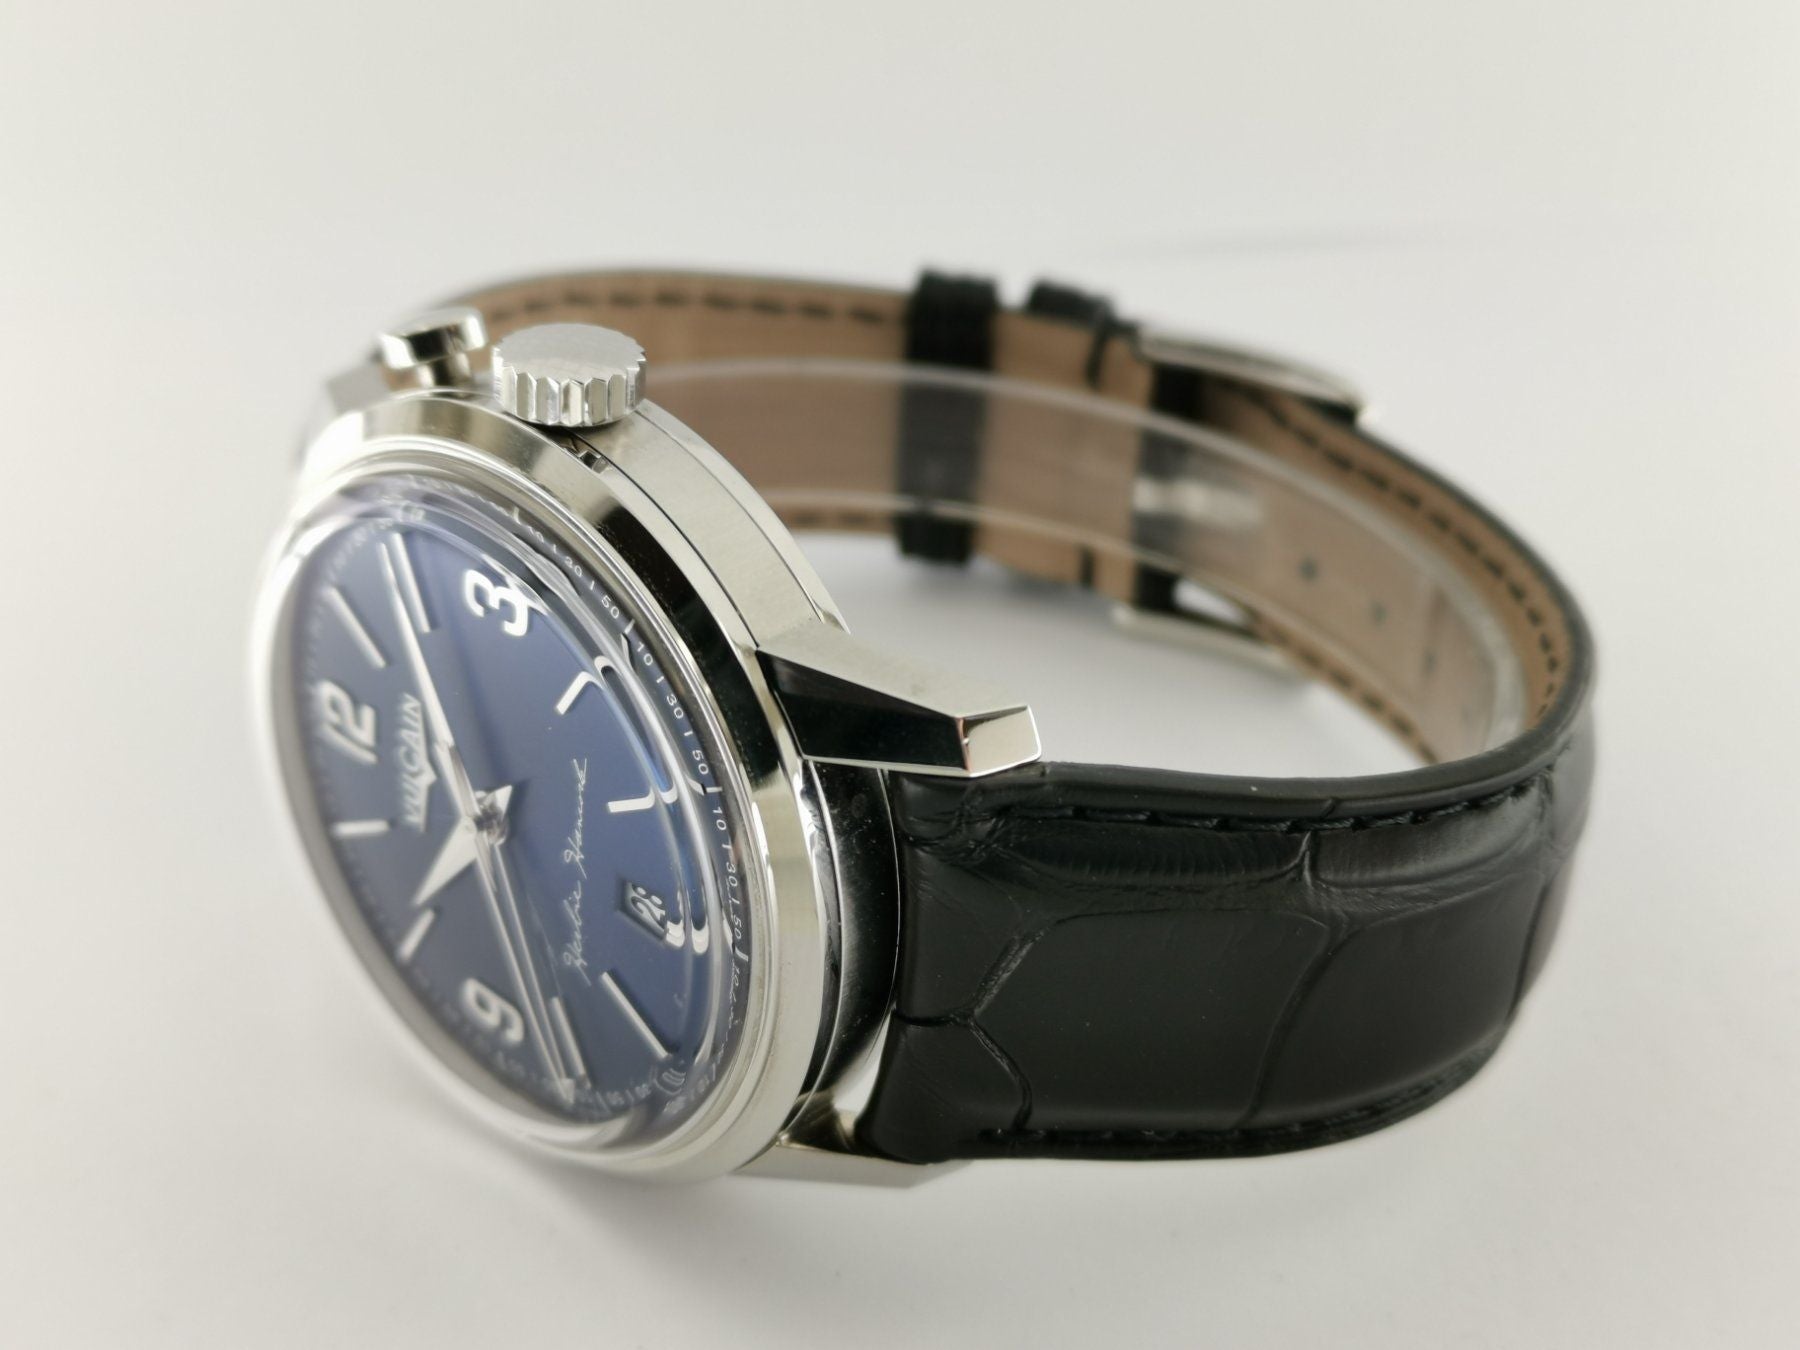 Vulcain 50s Presidents 160151.301L Limited Edition